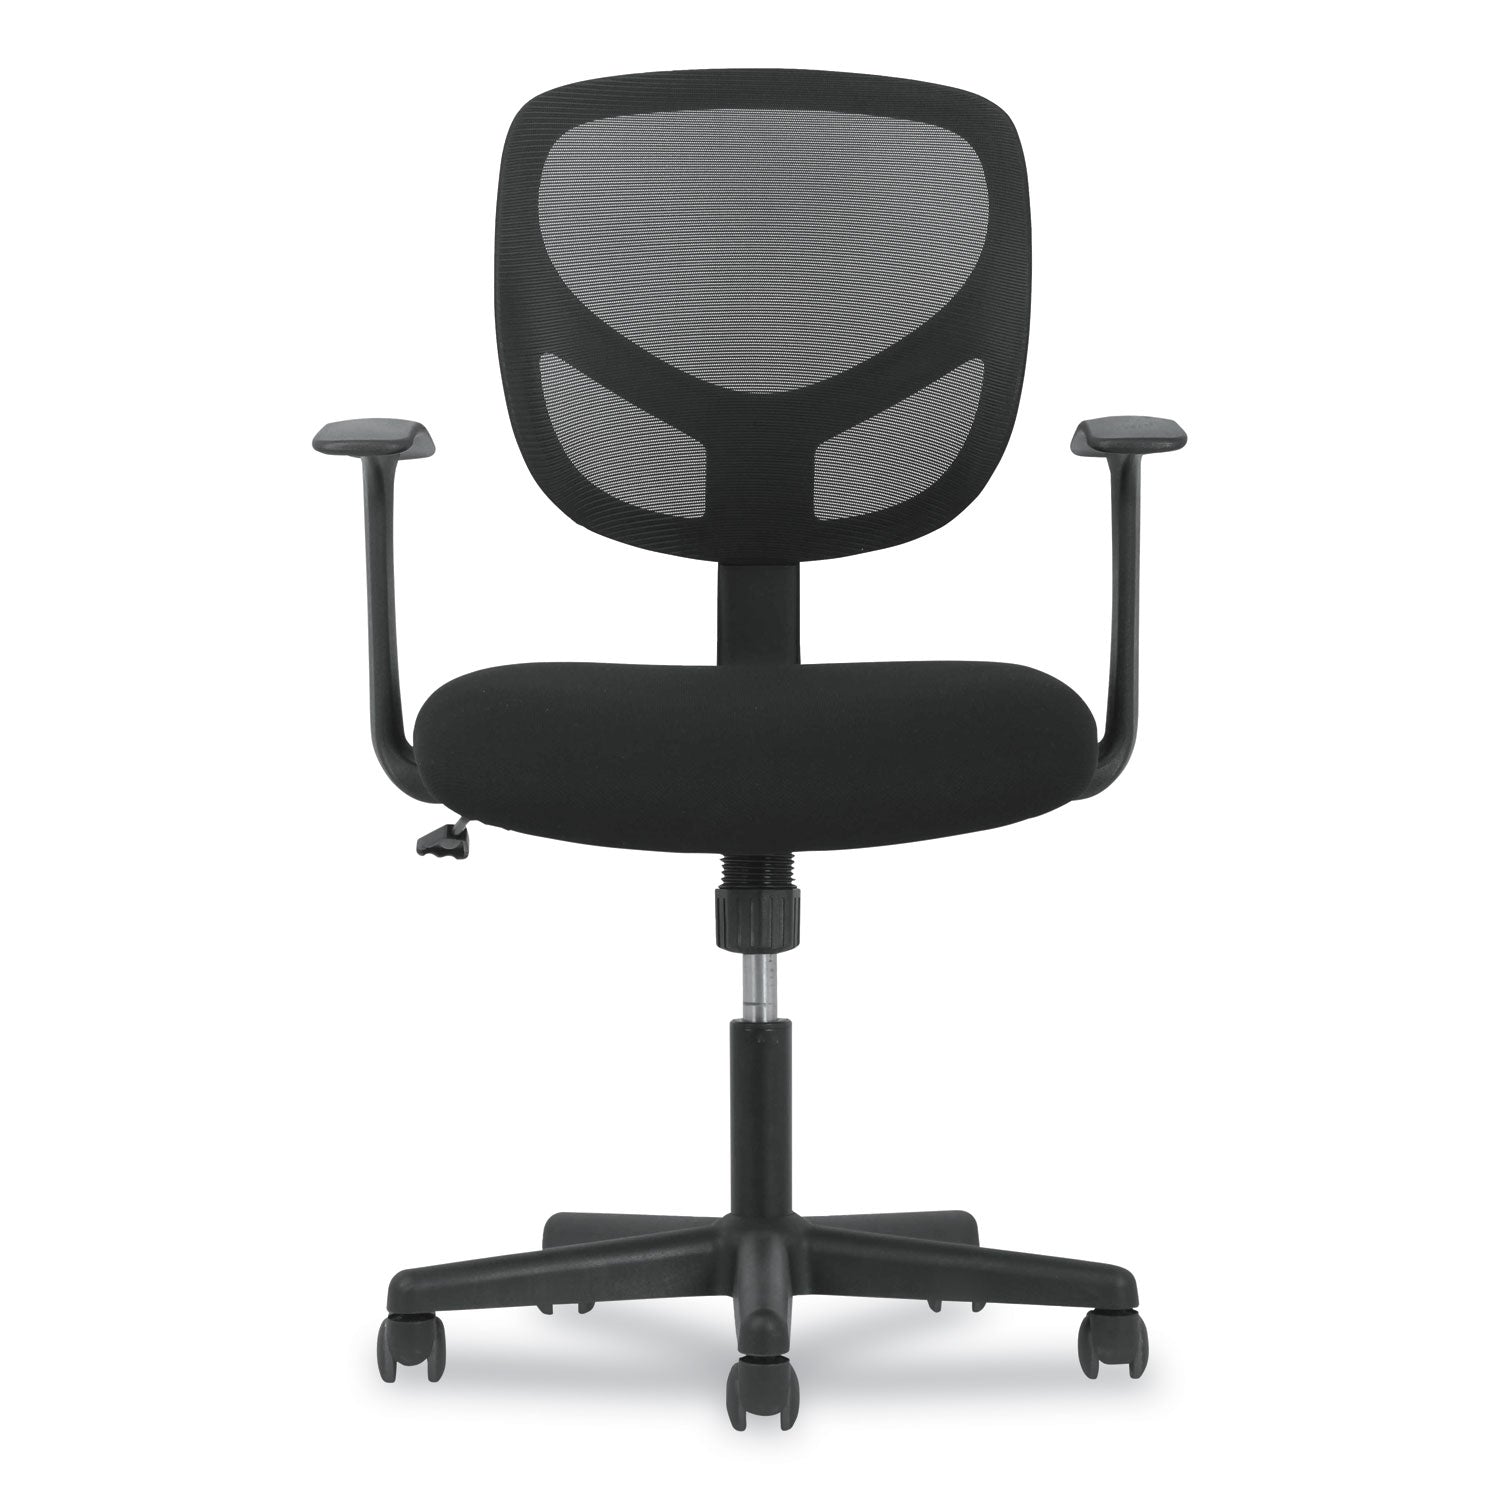 1-oh-two-mid-back-task-chairs-supports-up-to-250-lb-17-to-22-seat-height-black_bsxvst102 - 2